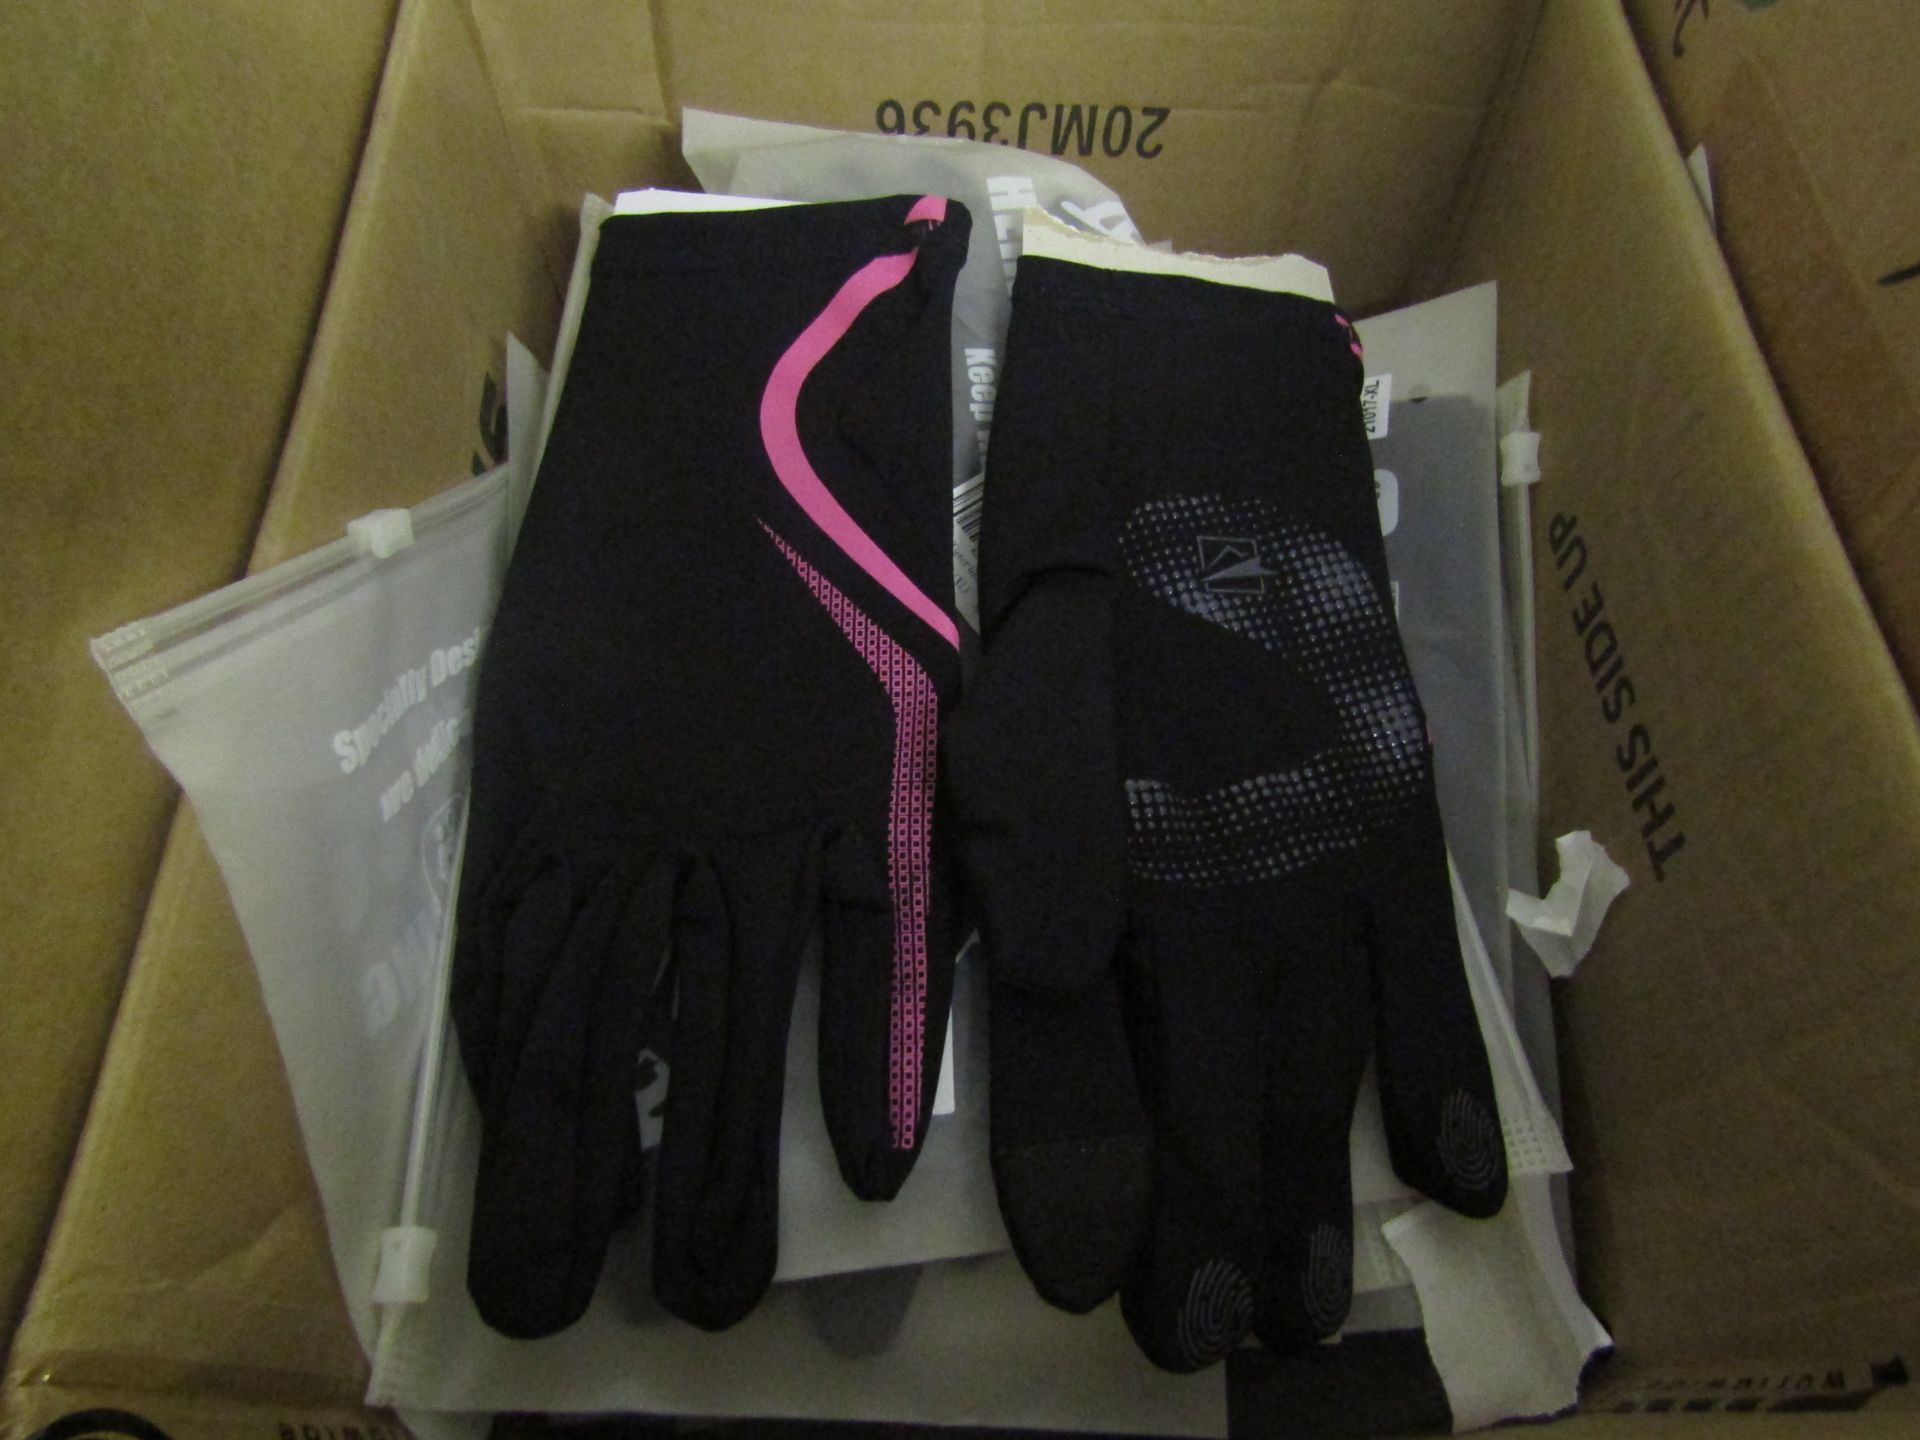 5x Sports gloves with smart phone fore finger, new Black & Pink, size XL